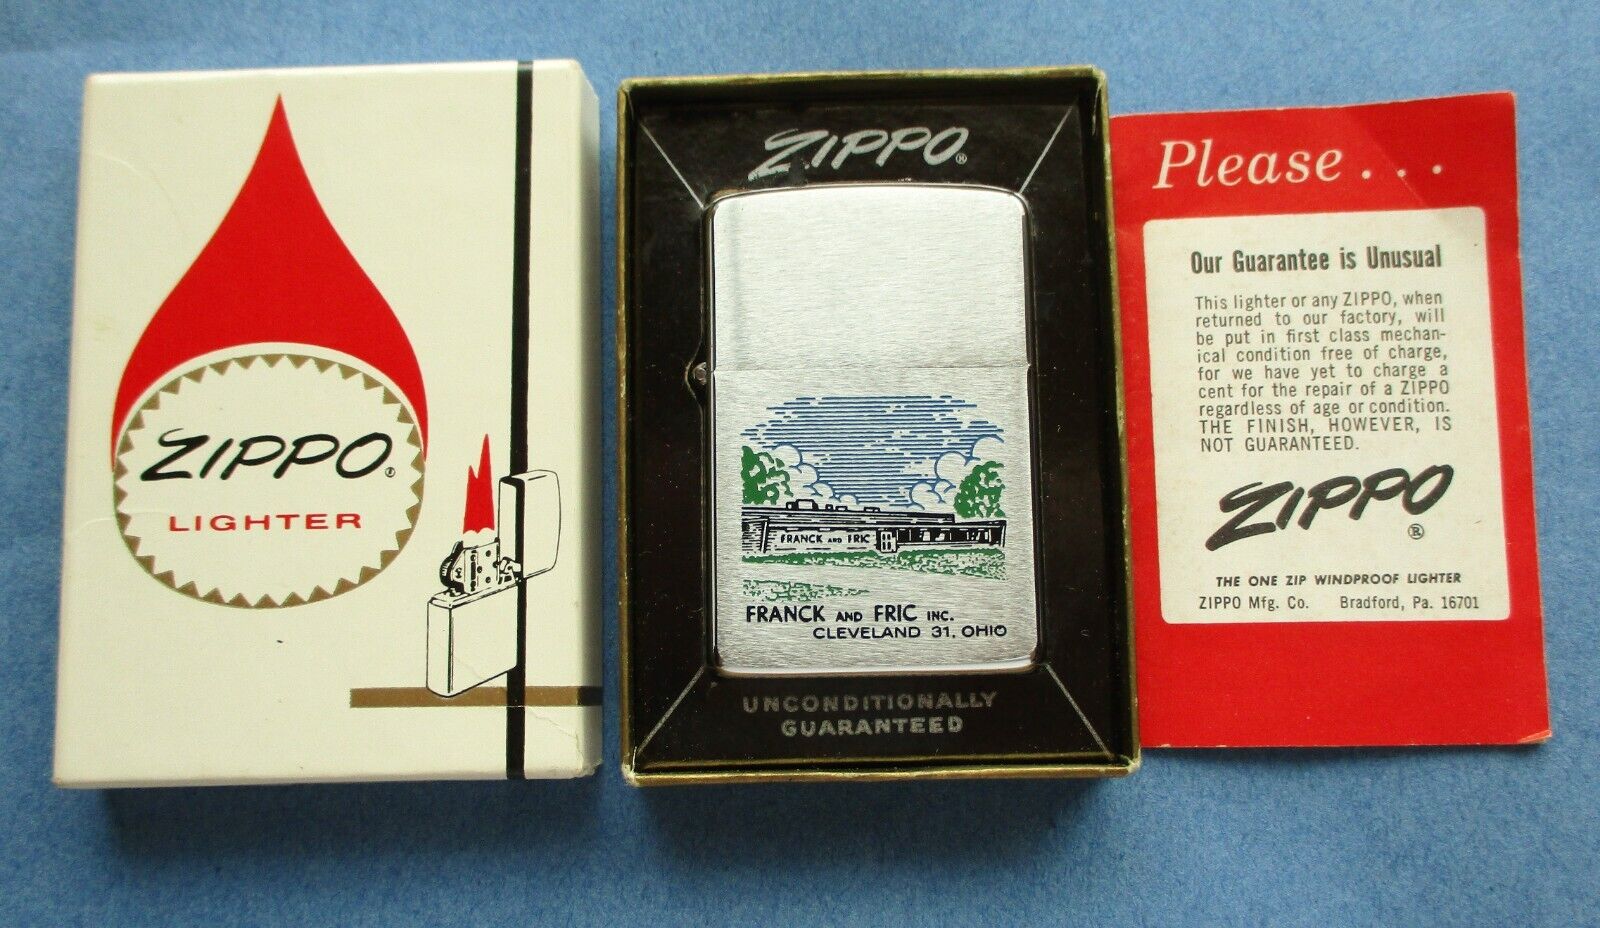 Vintage Zippo 1963 Lighter - FRANCK and FRIC  - Mint-In-Box with Guarantee Paper